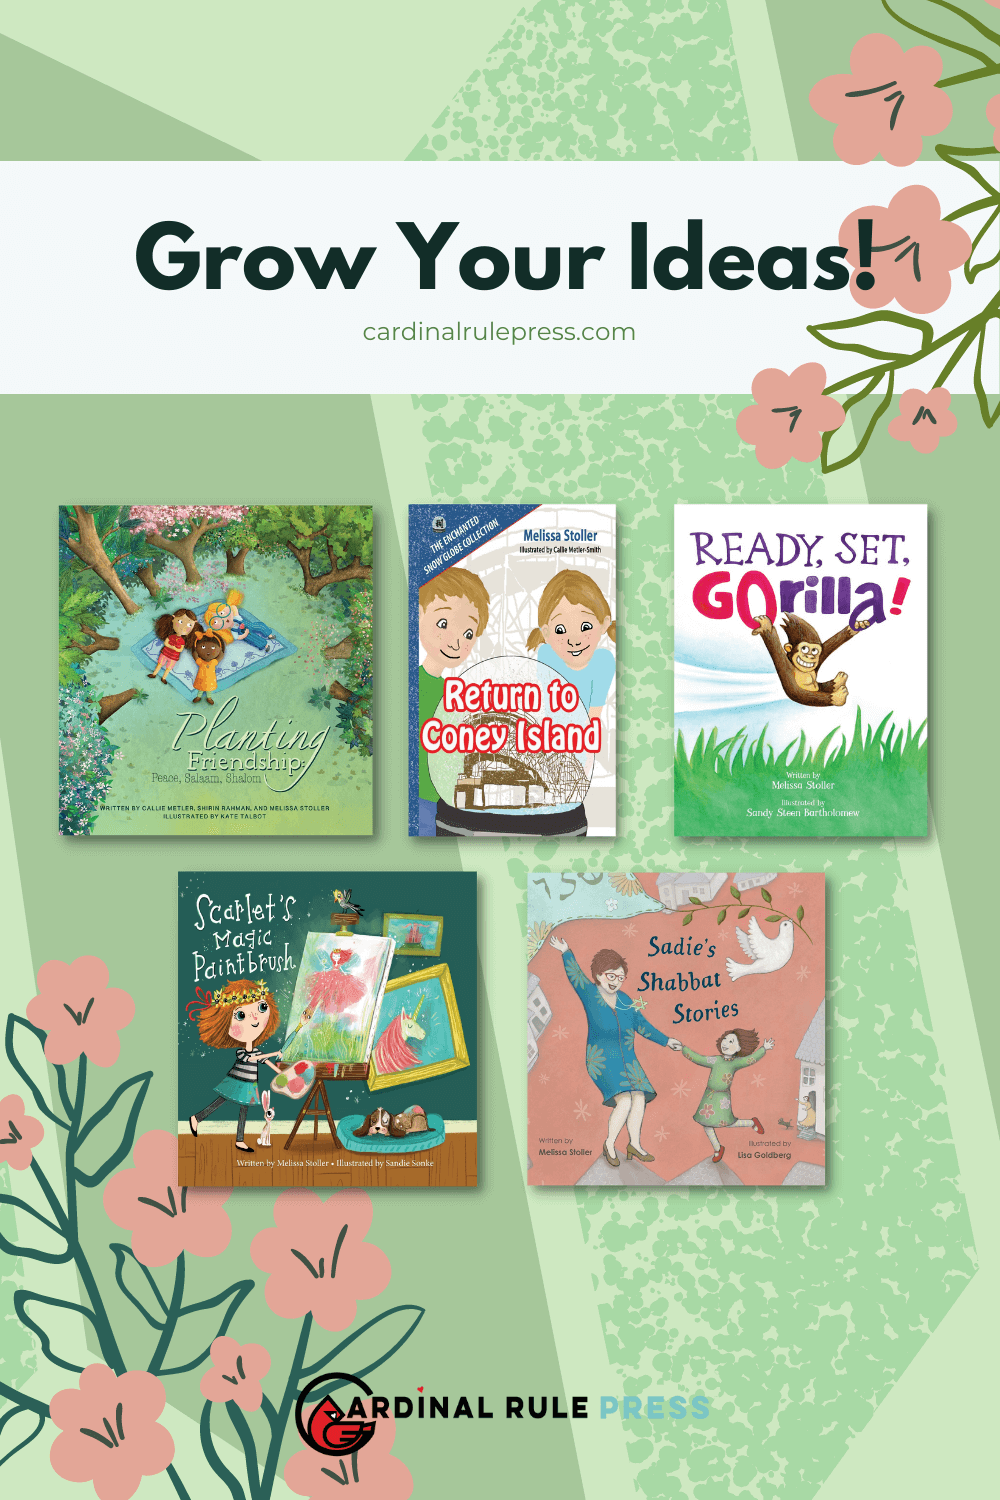 GROW YOUR IDEAS! Here are some tips to unearthing story nuggets. #GrowYourIdeas #WritingTips #Writing